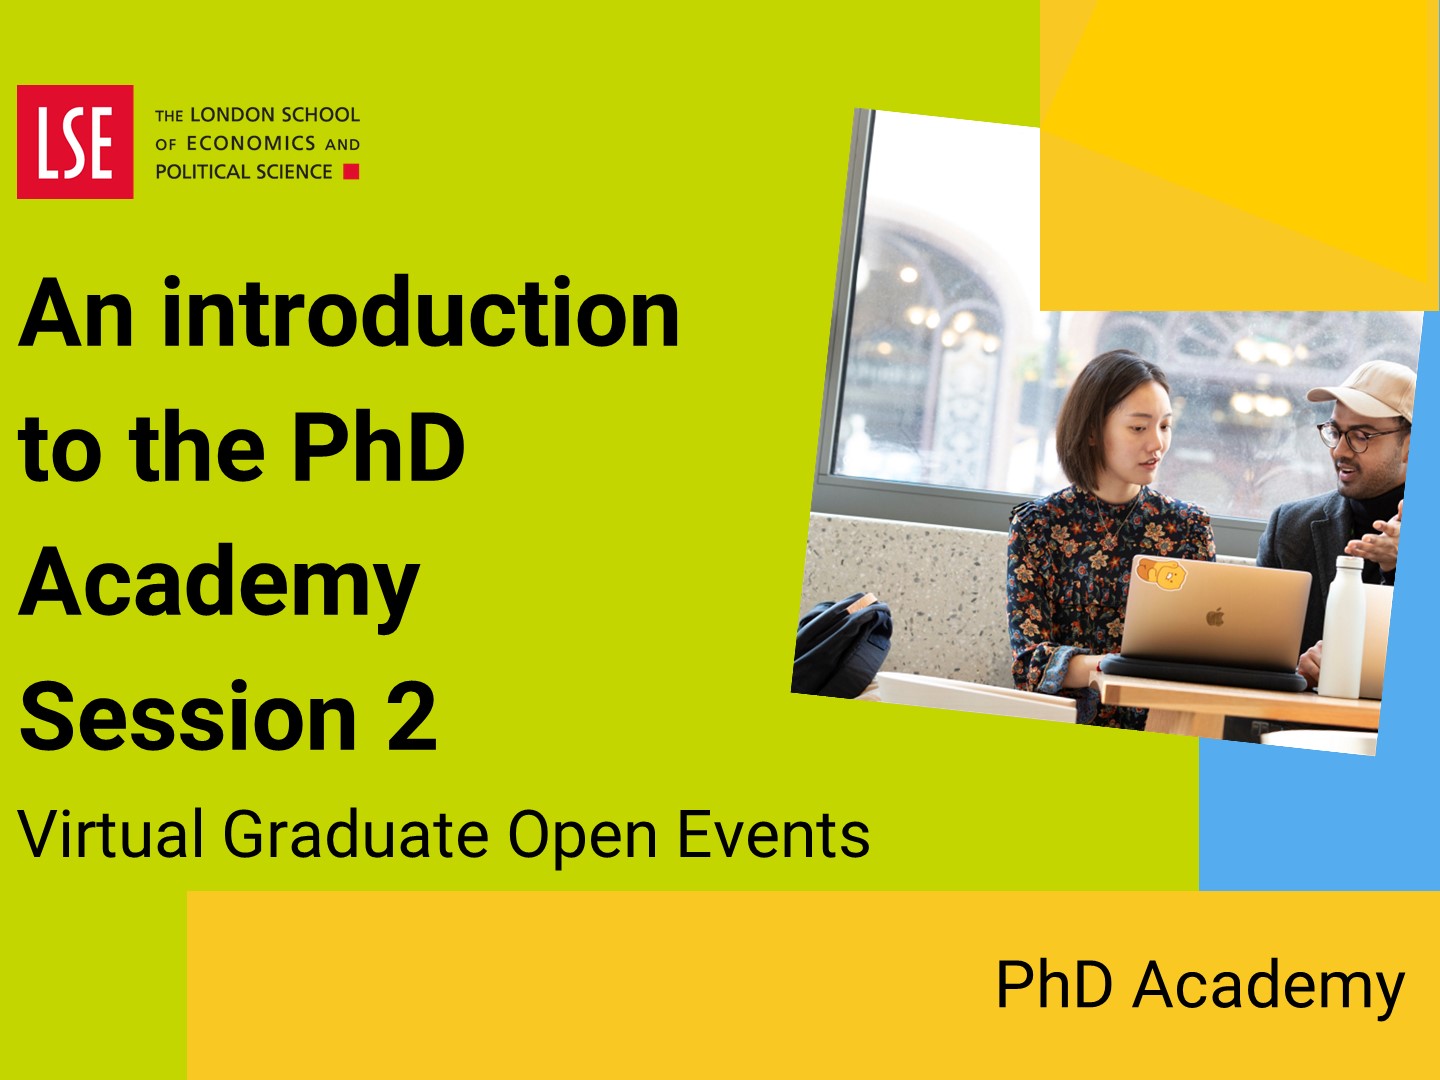 An introduction to the PhD Academy (session 2)